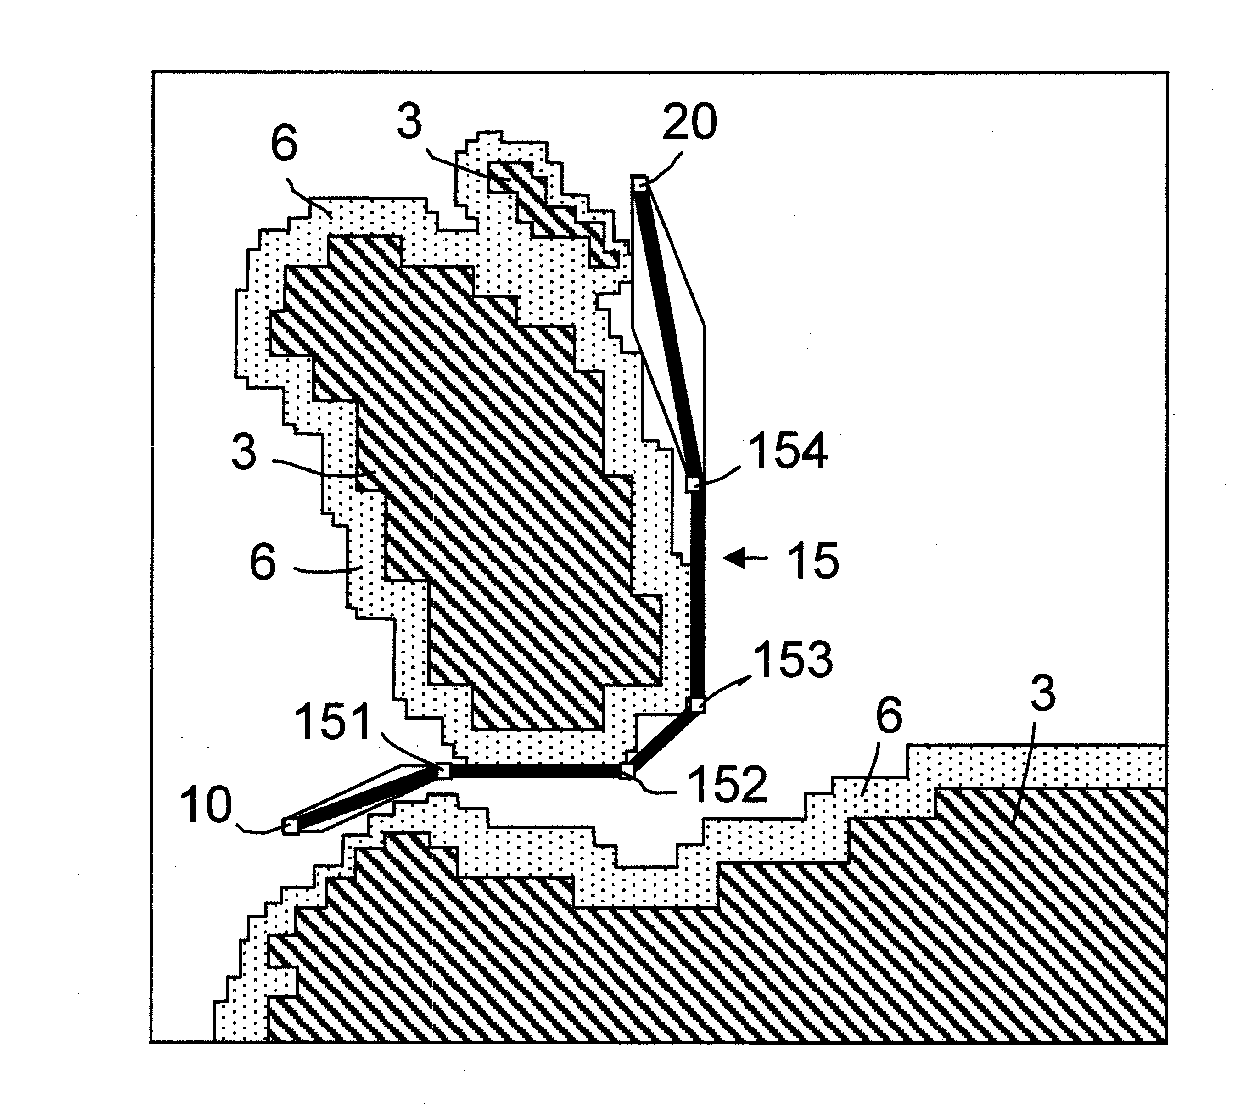 Method for Determining the Horizontal Profile of a Flight Plan Complying with a Prescribed Vertical Flight Profile